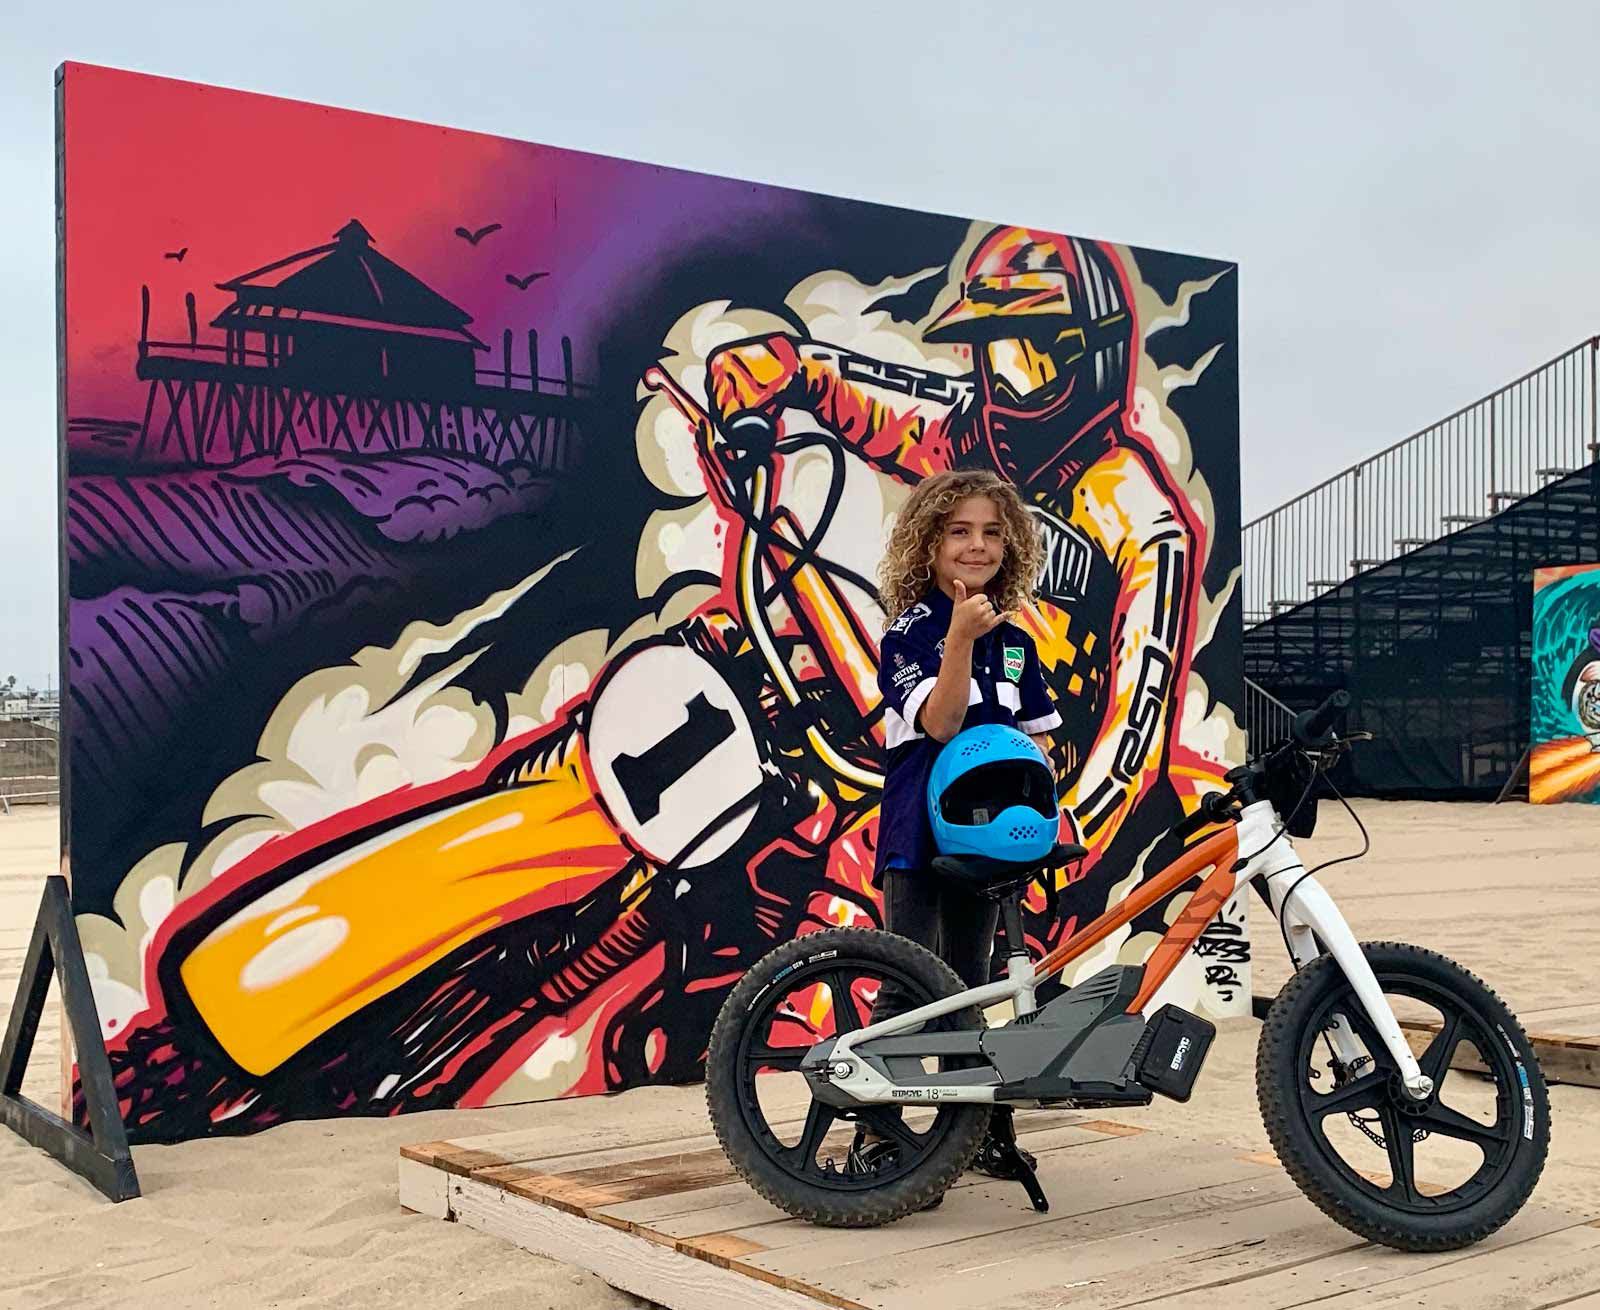 Stacyc champion racer posing in front of Josh Pena’s incredible “Moto Flow” artwork during event setup.